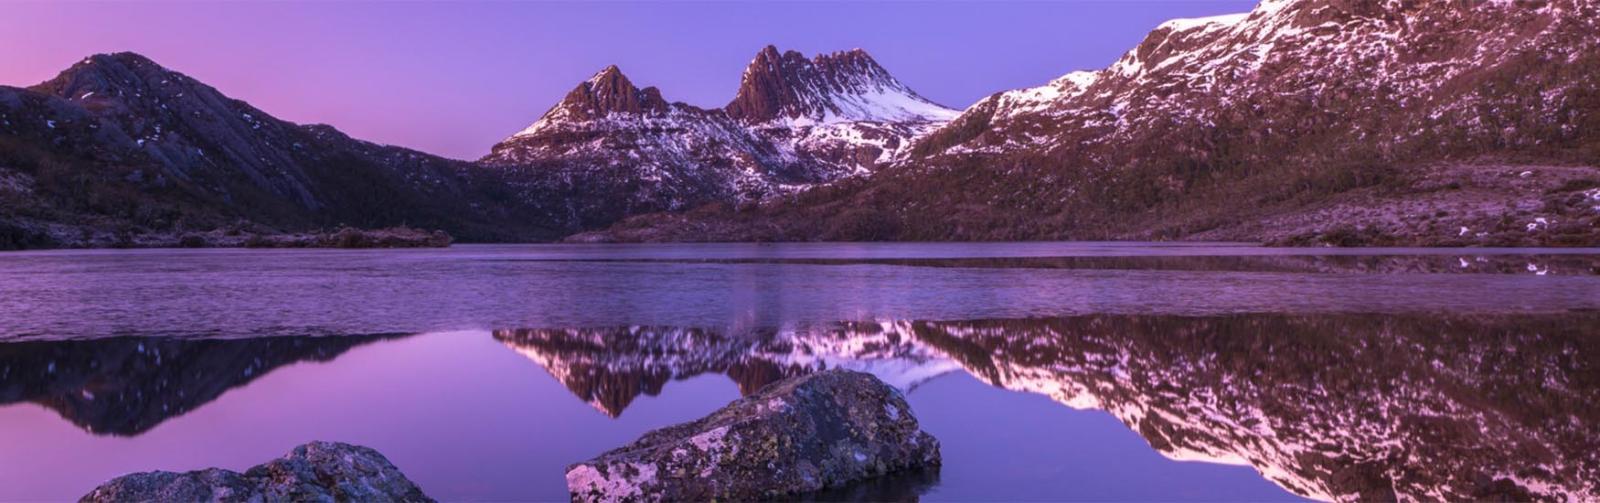 Snow on Cradle Mountain at dawn